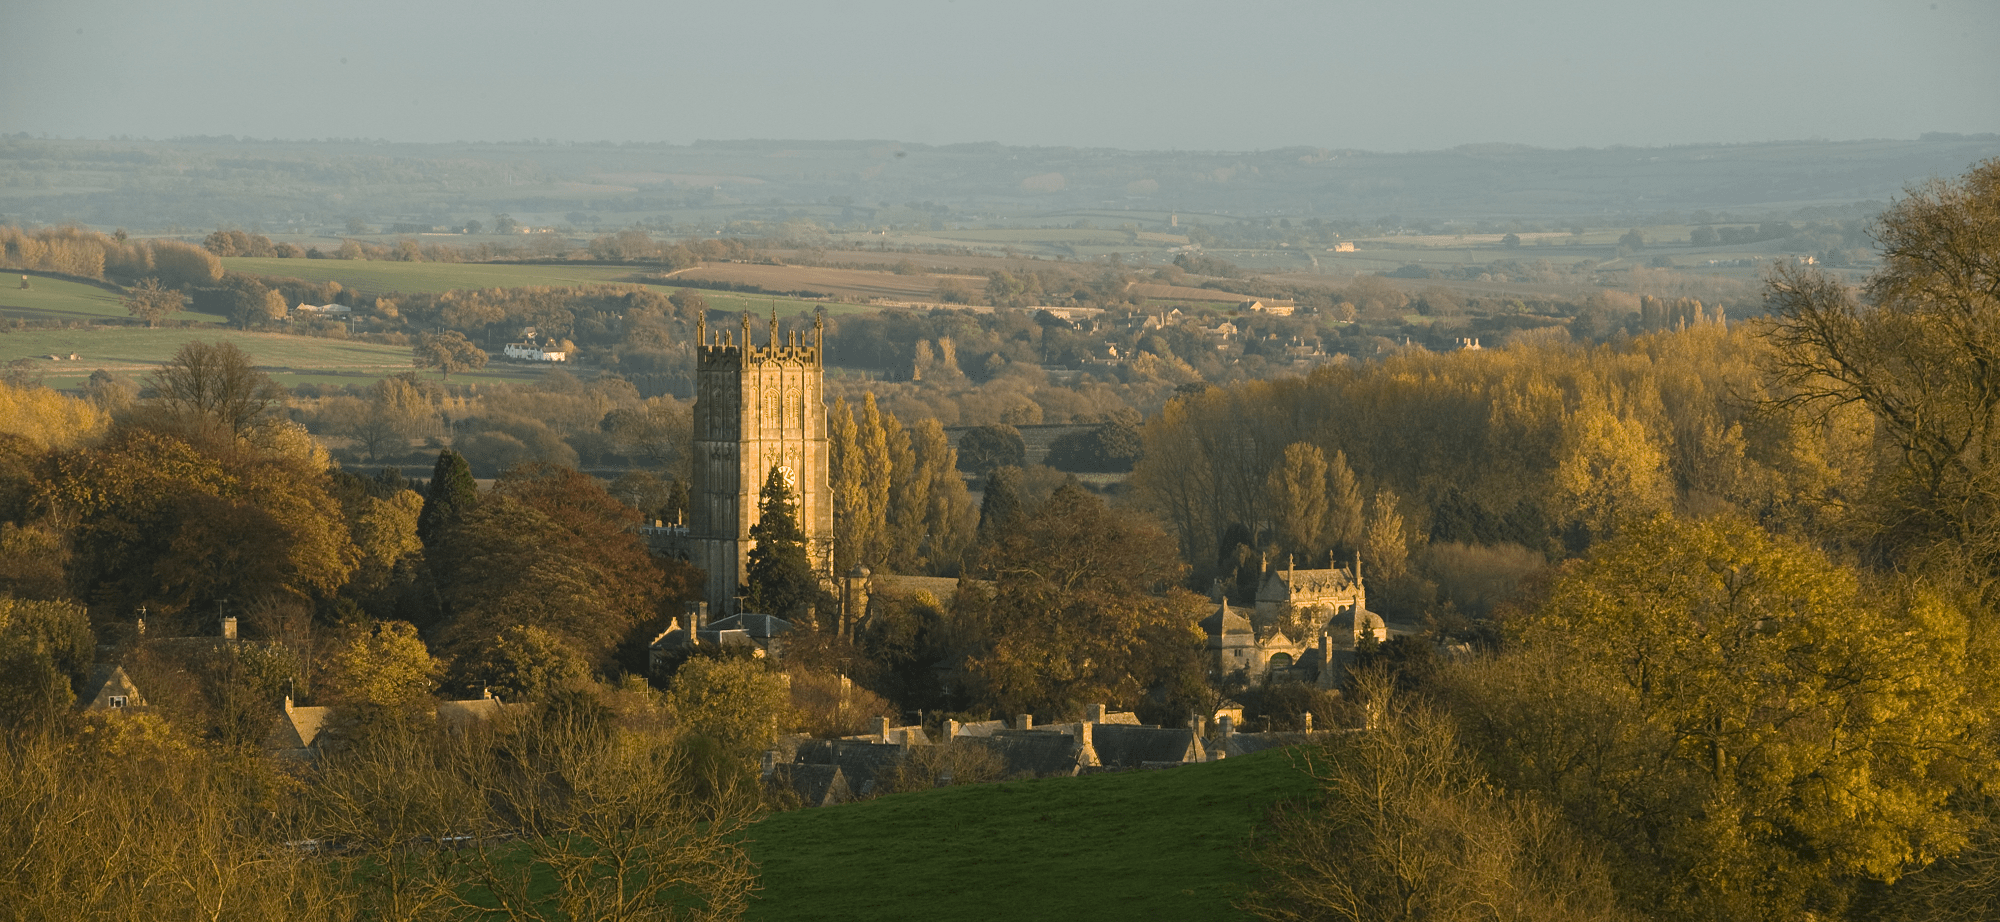 The town of Winchcombe